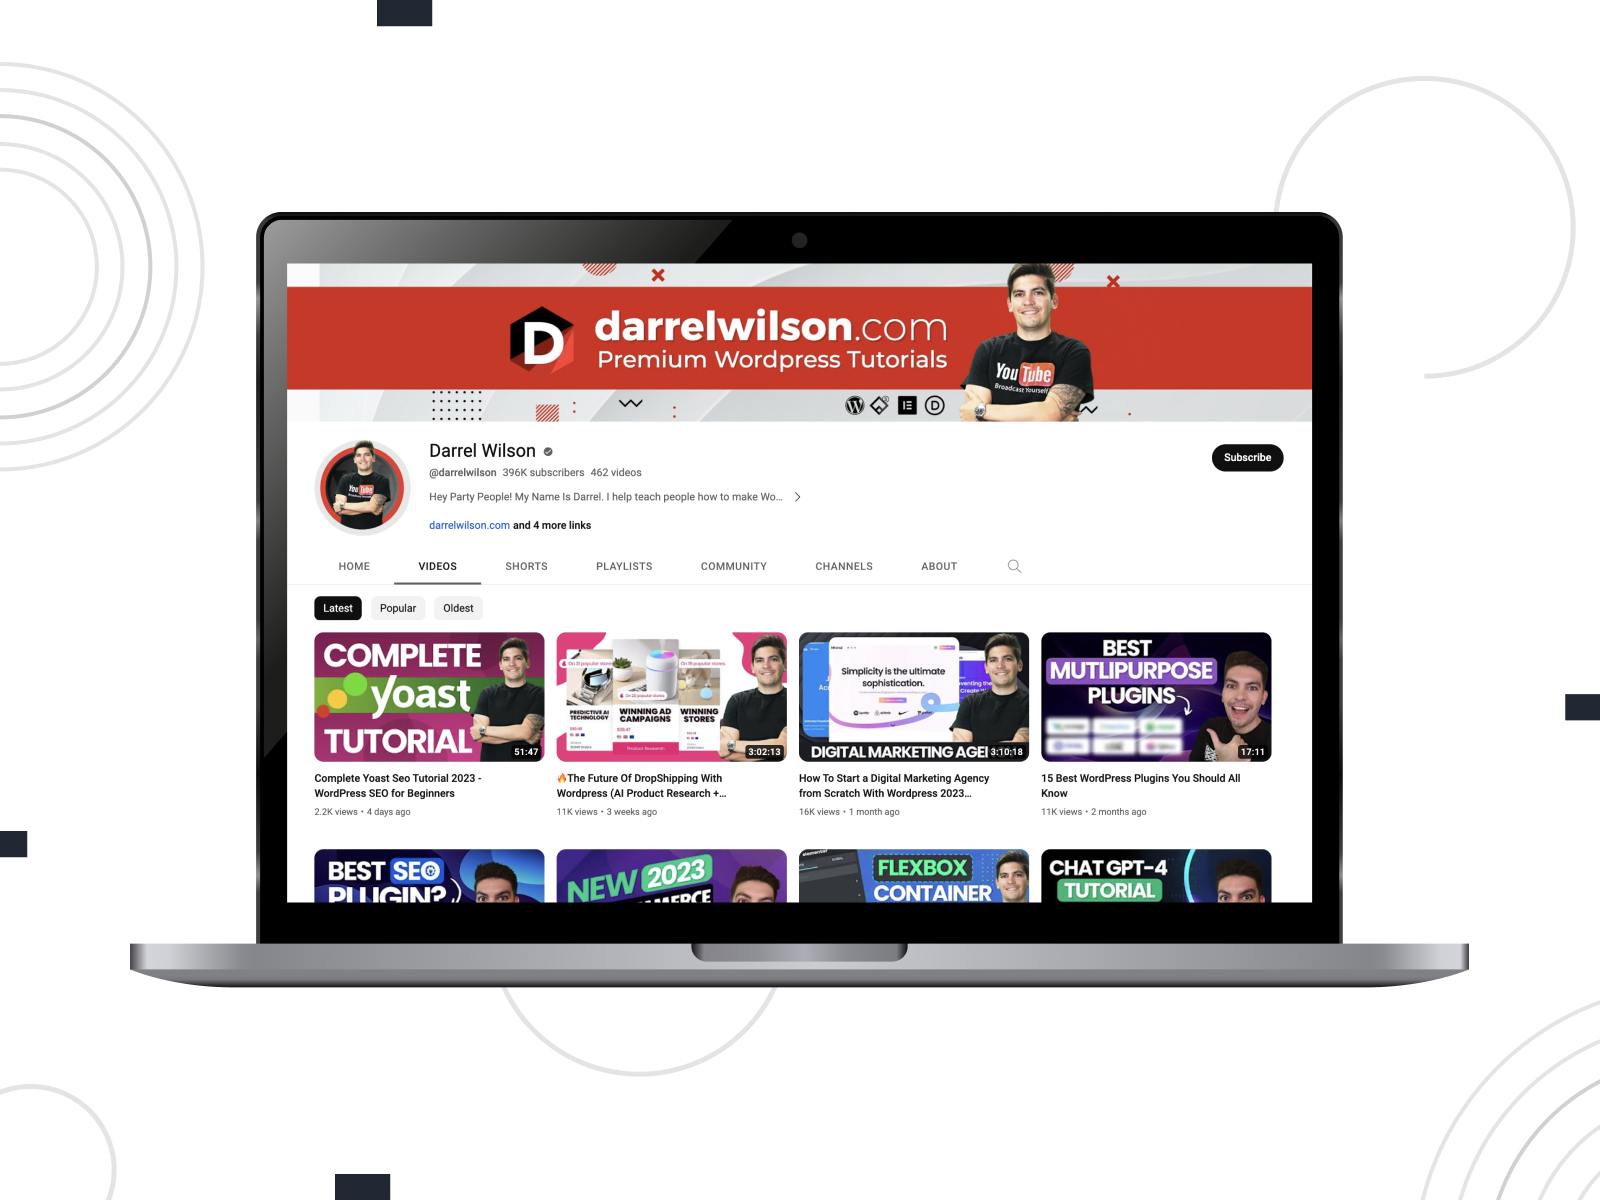 Visual of Darrel Wilson, a notable WordPress influencer, whose channel delivers tutorials and even whole online courses for viewers looking for WordPress and eCommerce tips.